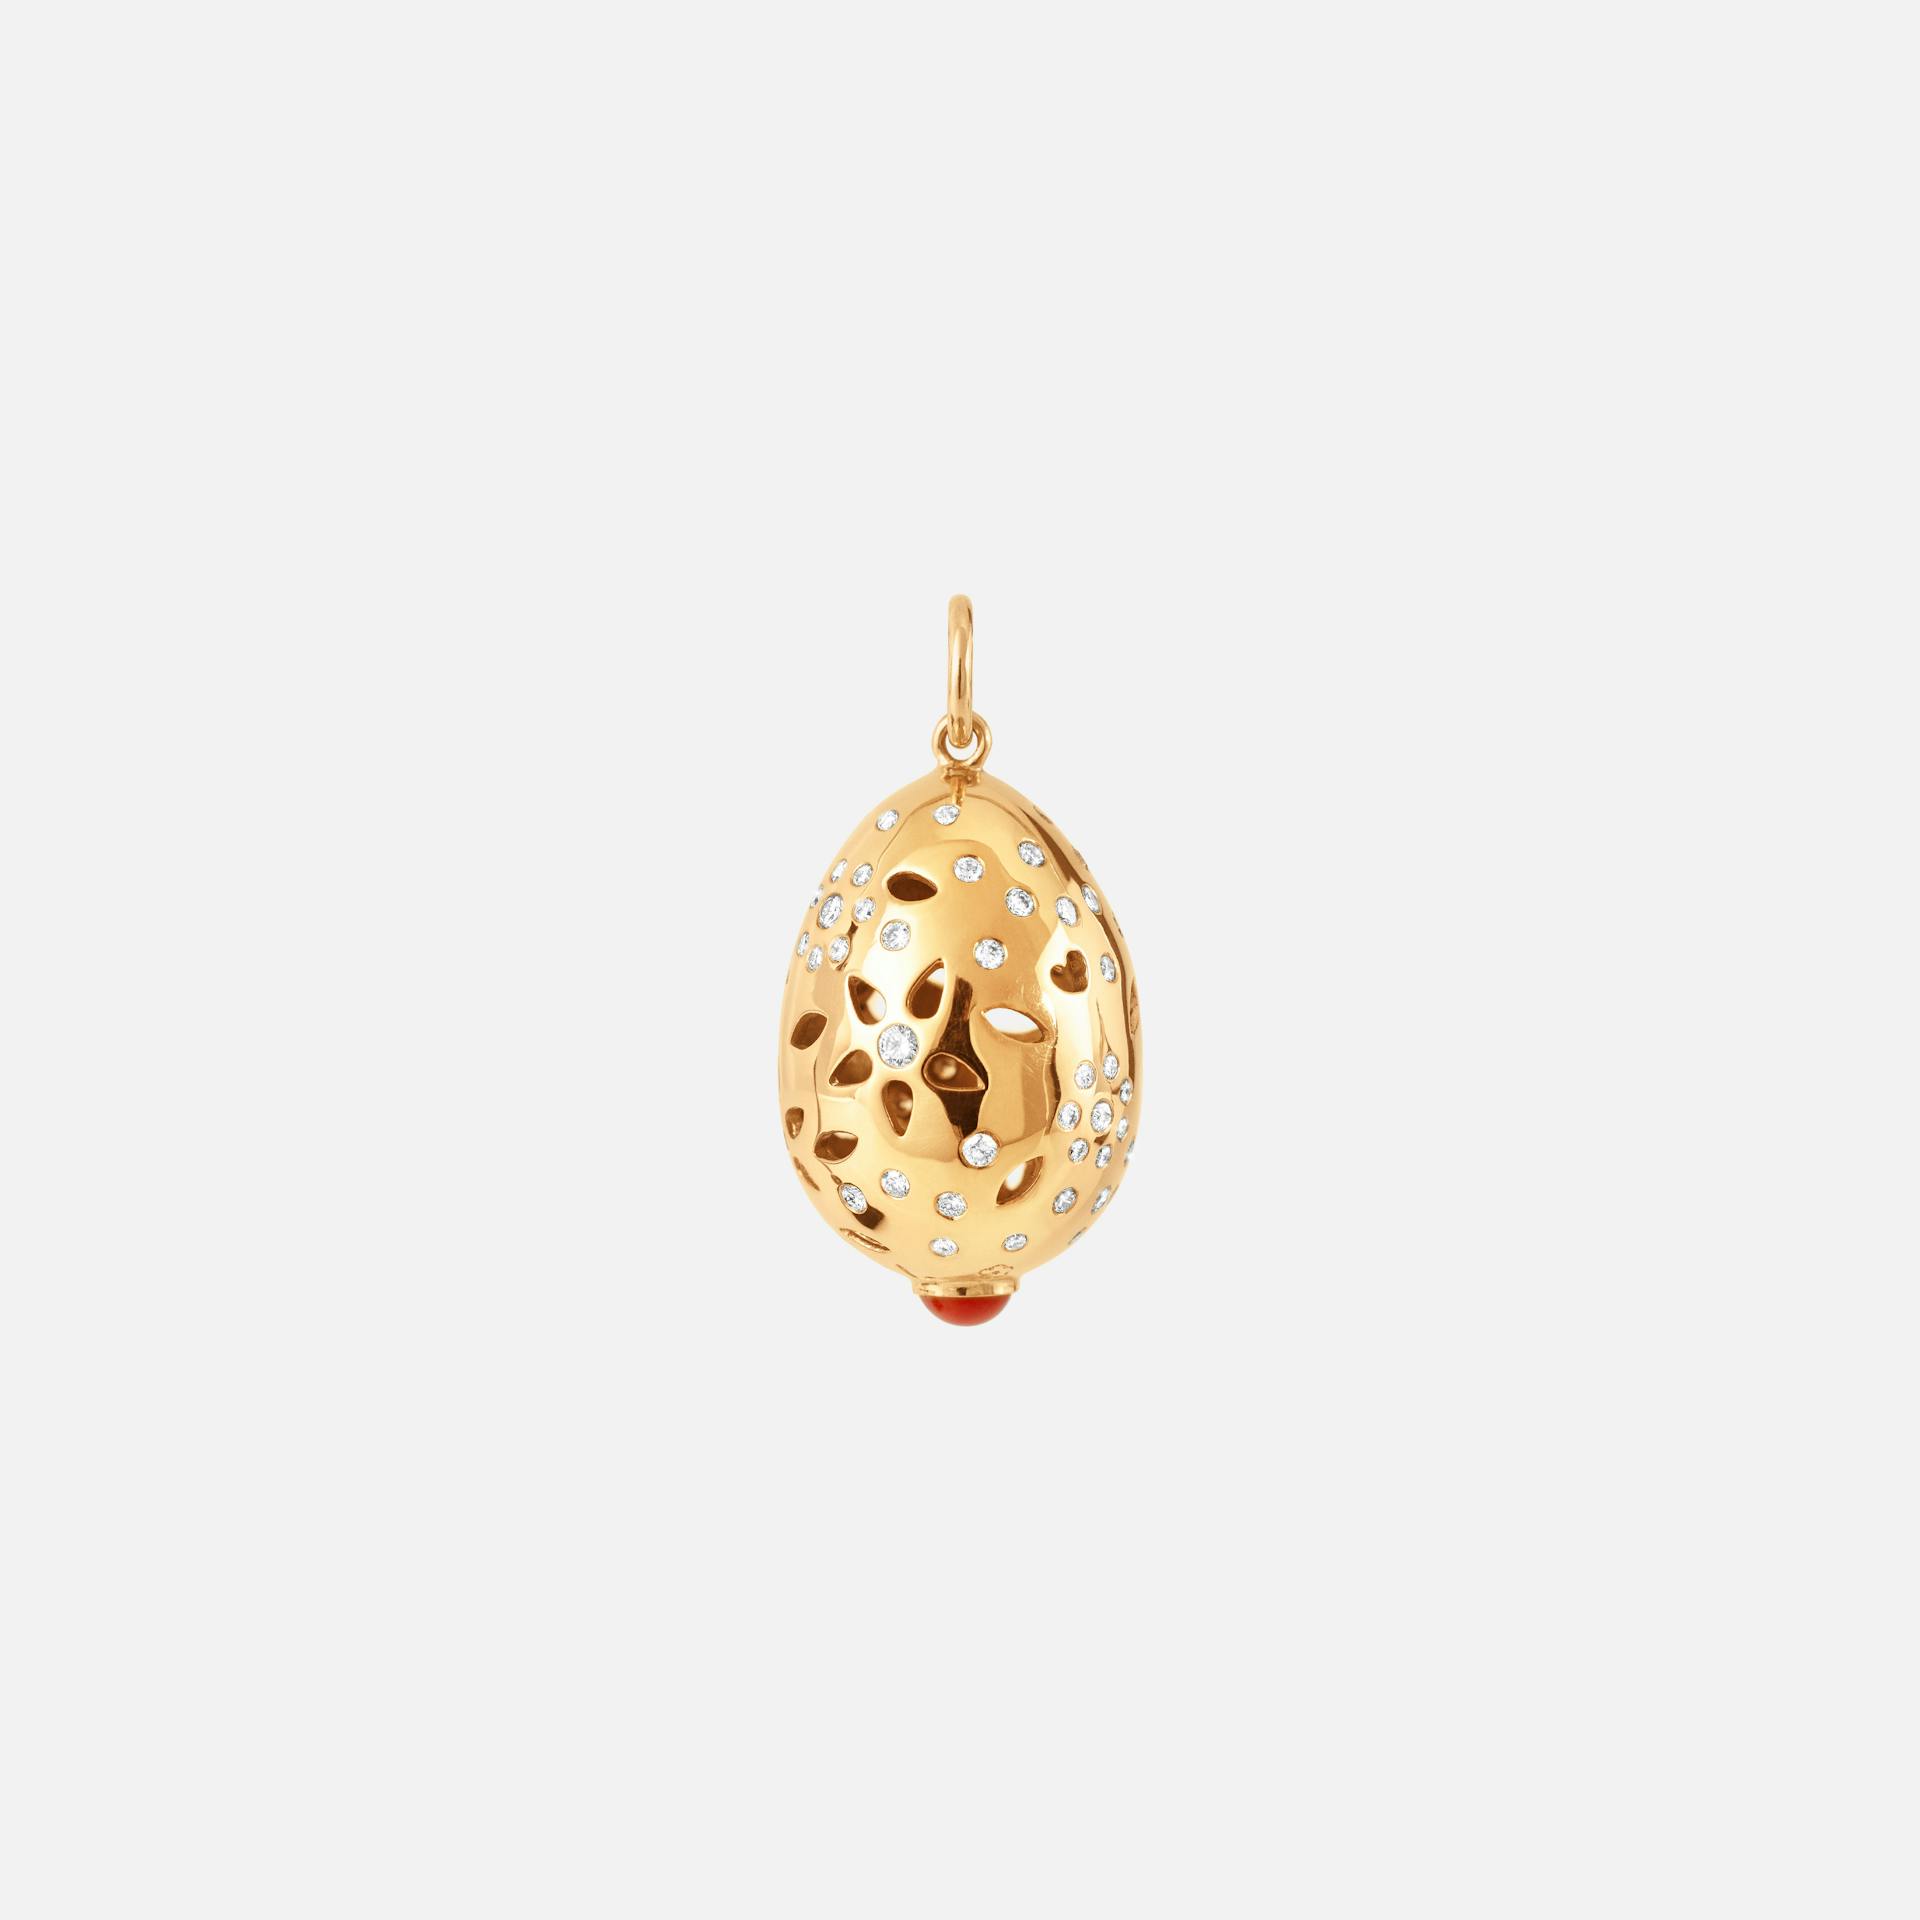 Lace Pendant in Yellow Gold with Diamonds & Red Coral  |  Ole Lynggaard Copenhagen